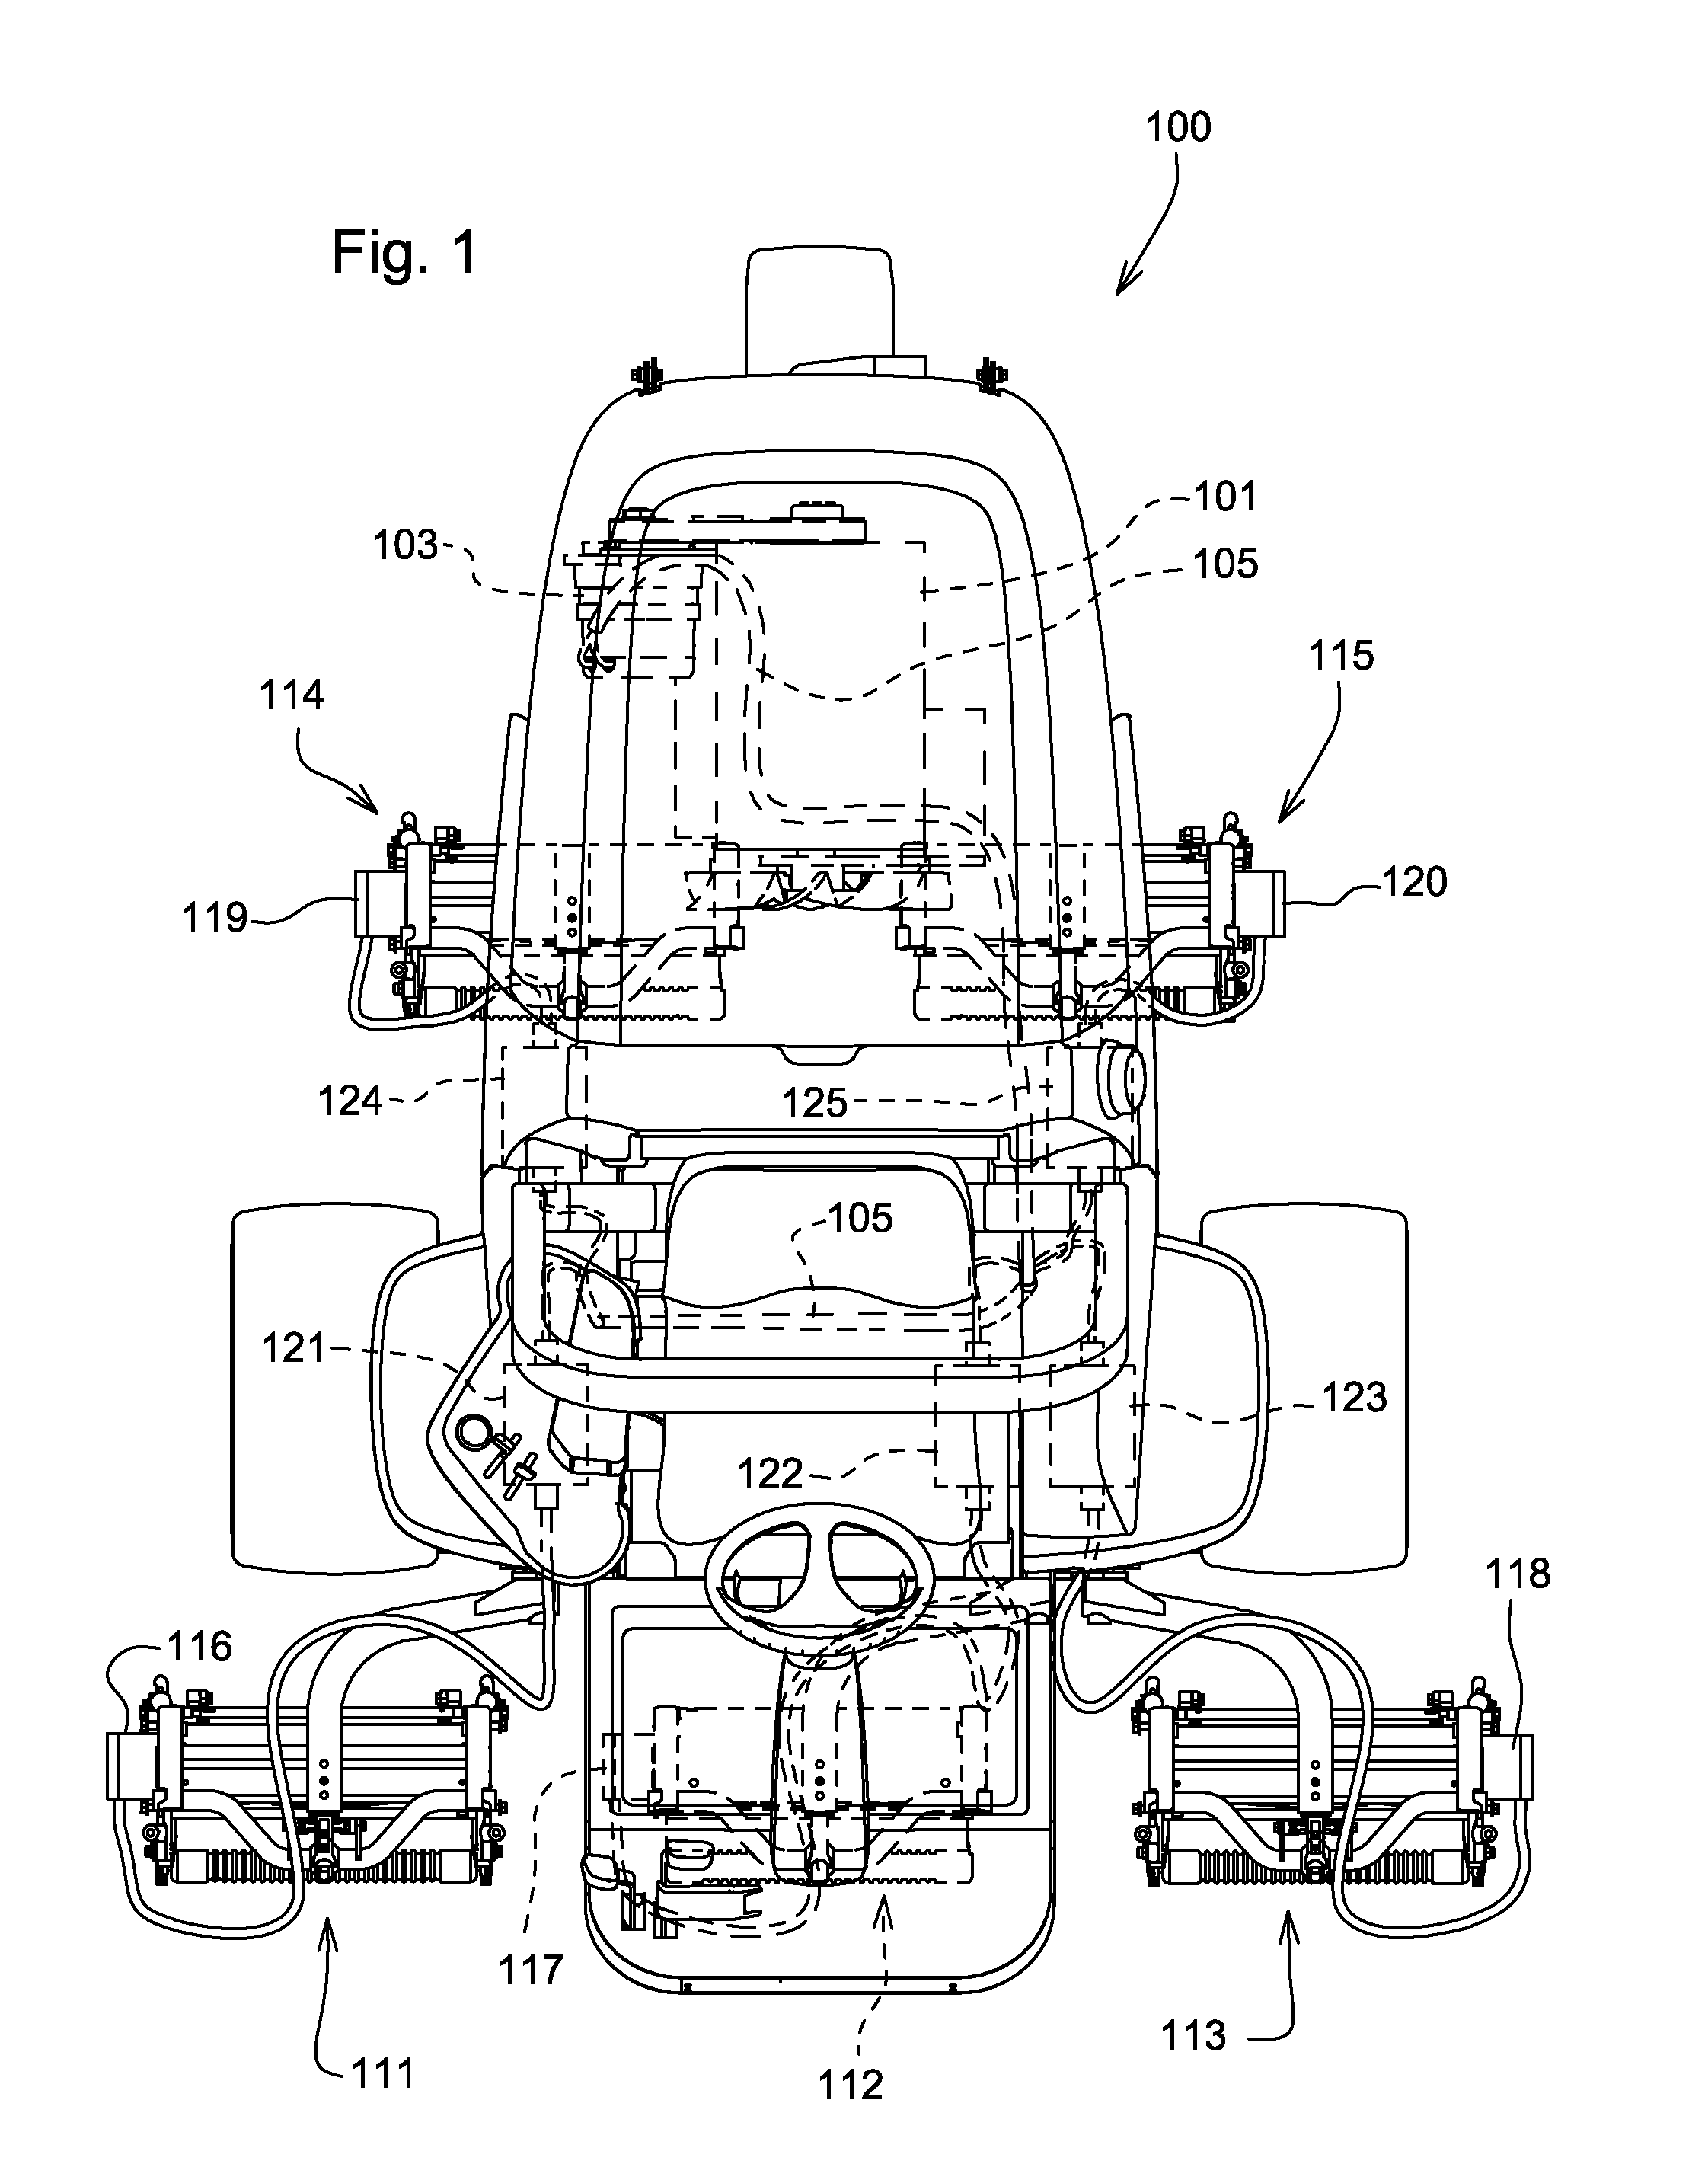 Power limiting system for multiple electric motors